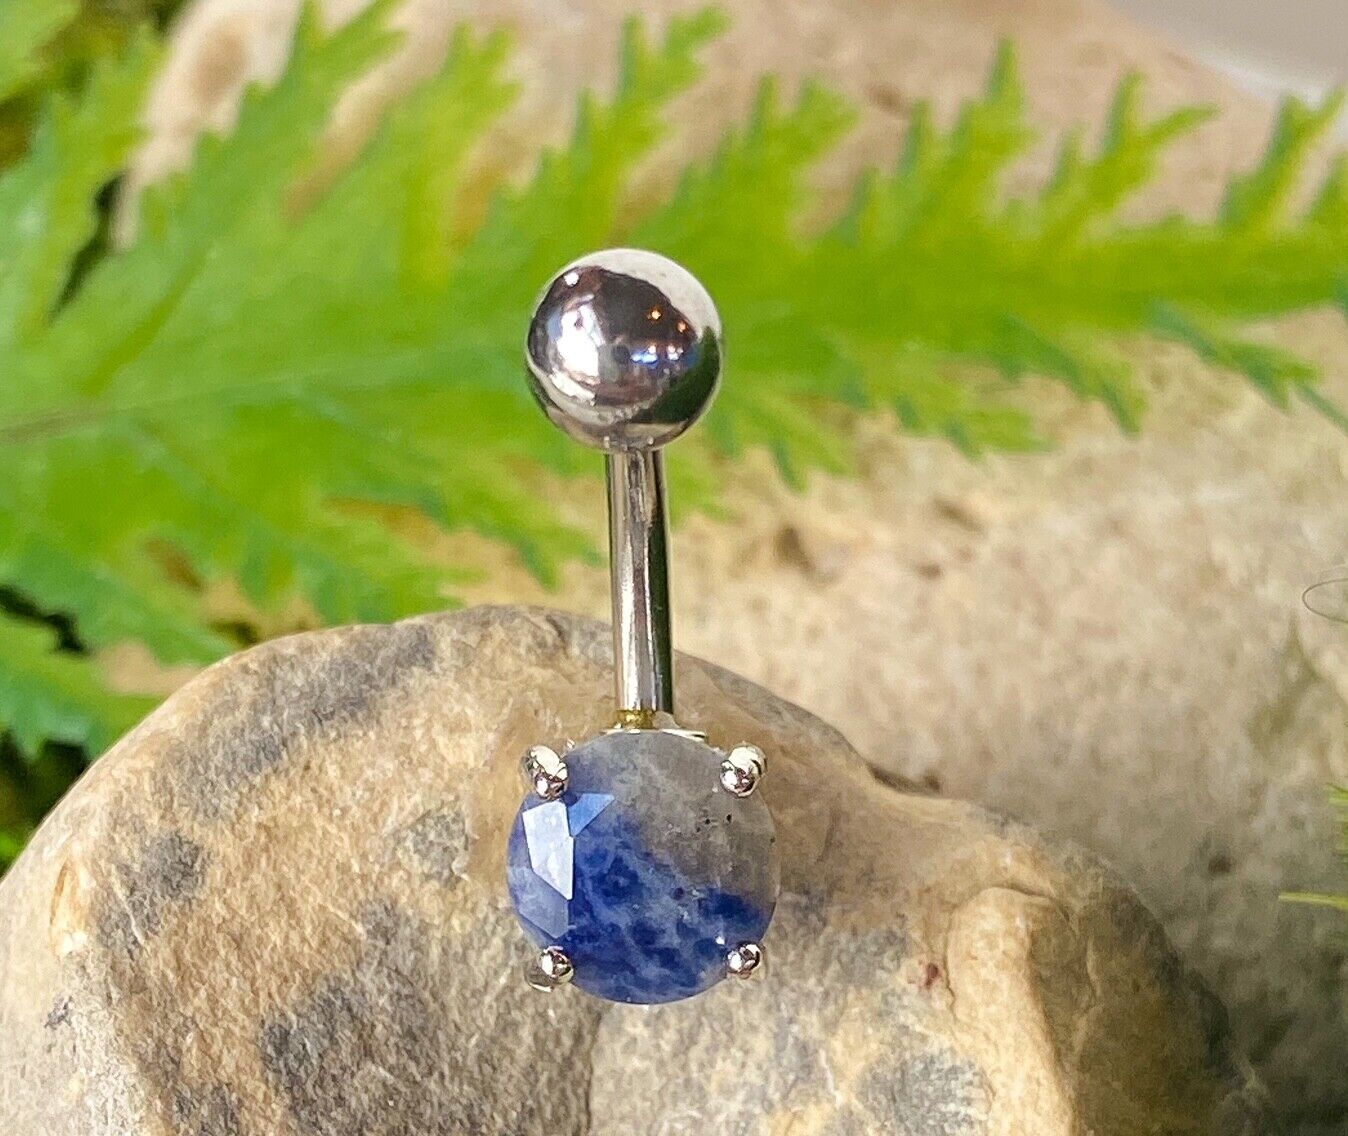 Solitaire Semi-Precious Belly Ring Natural Stone Pierced Navel Naval 14g Prong